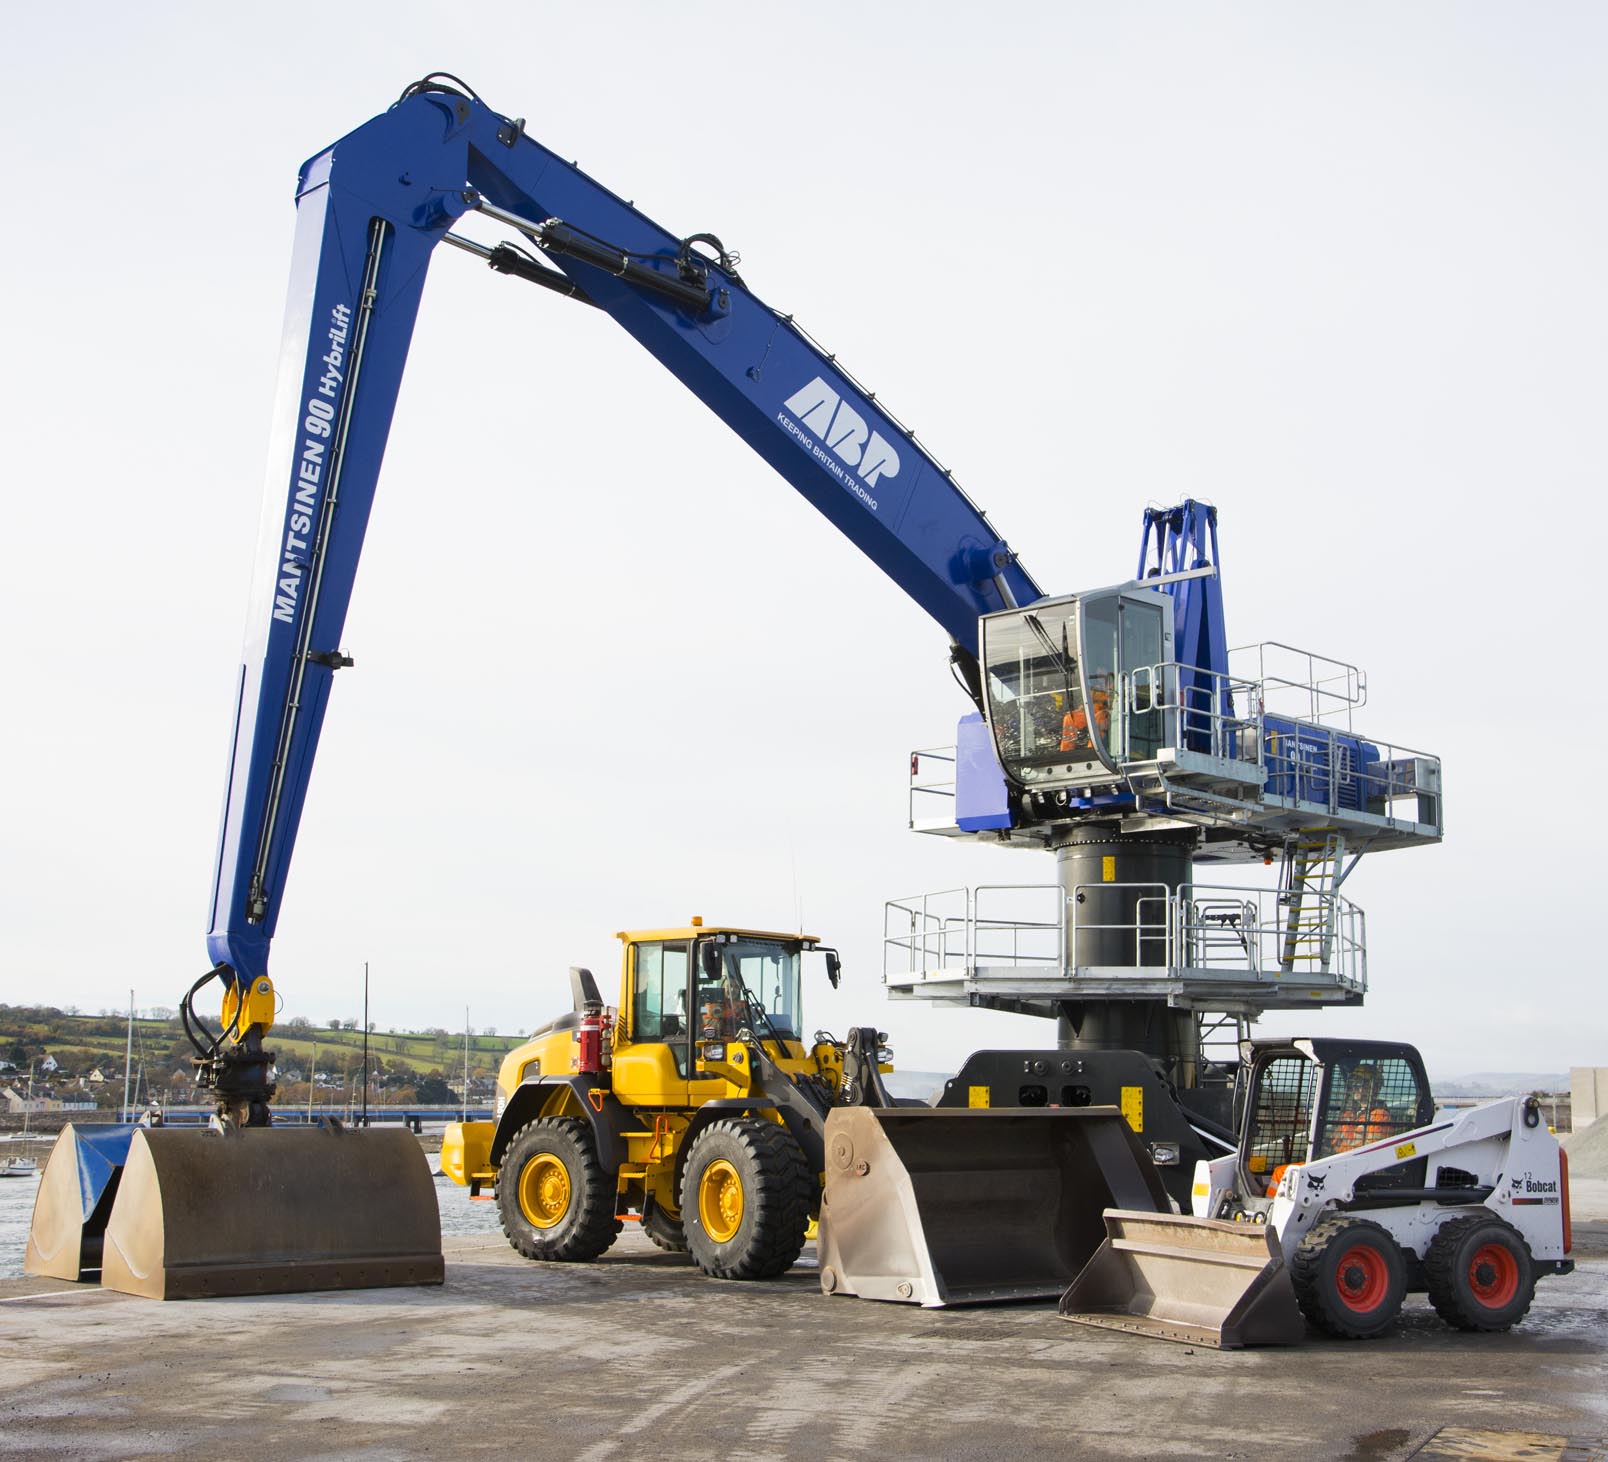 The Port of Teignmouth invests another £900,000 into new equipment ...